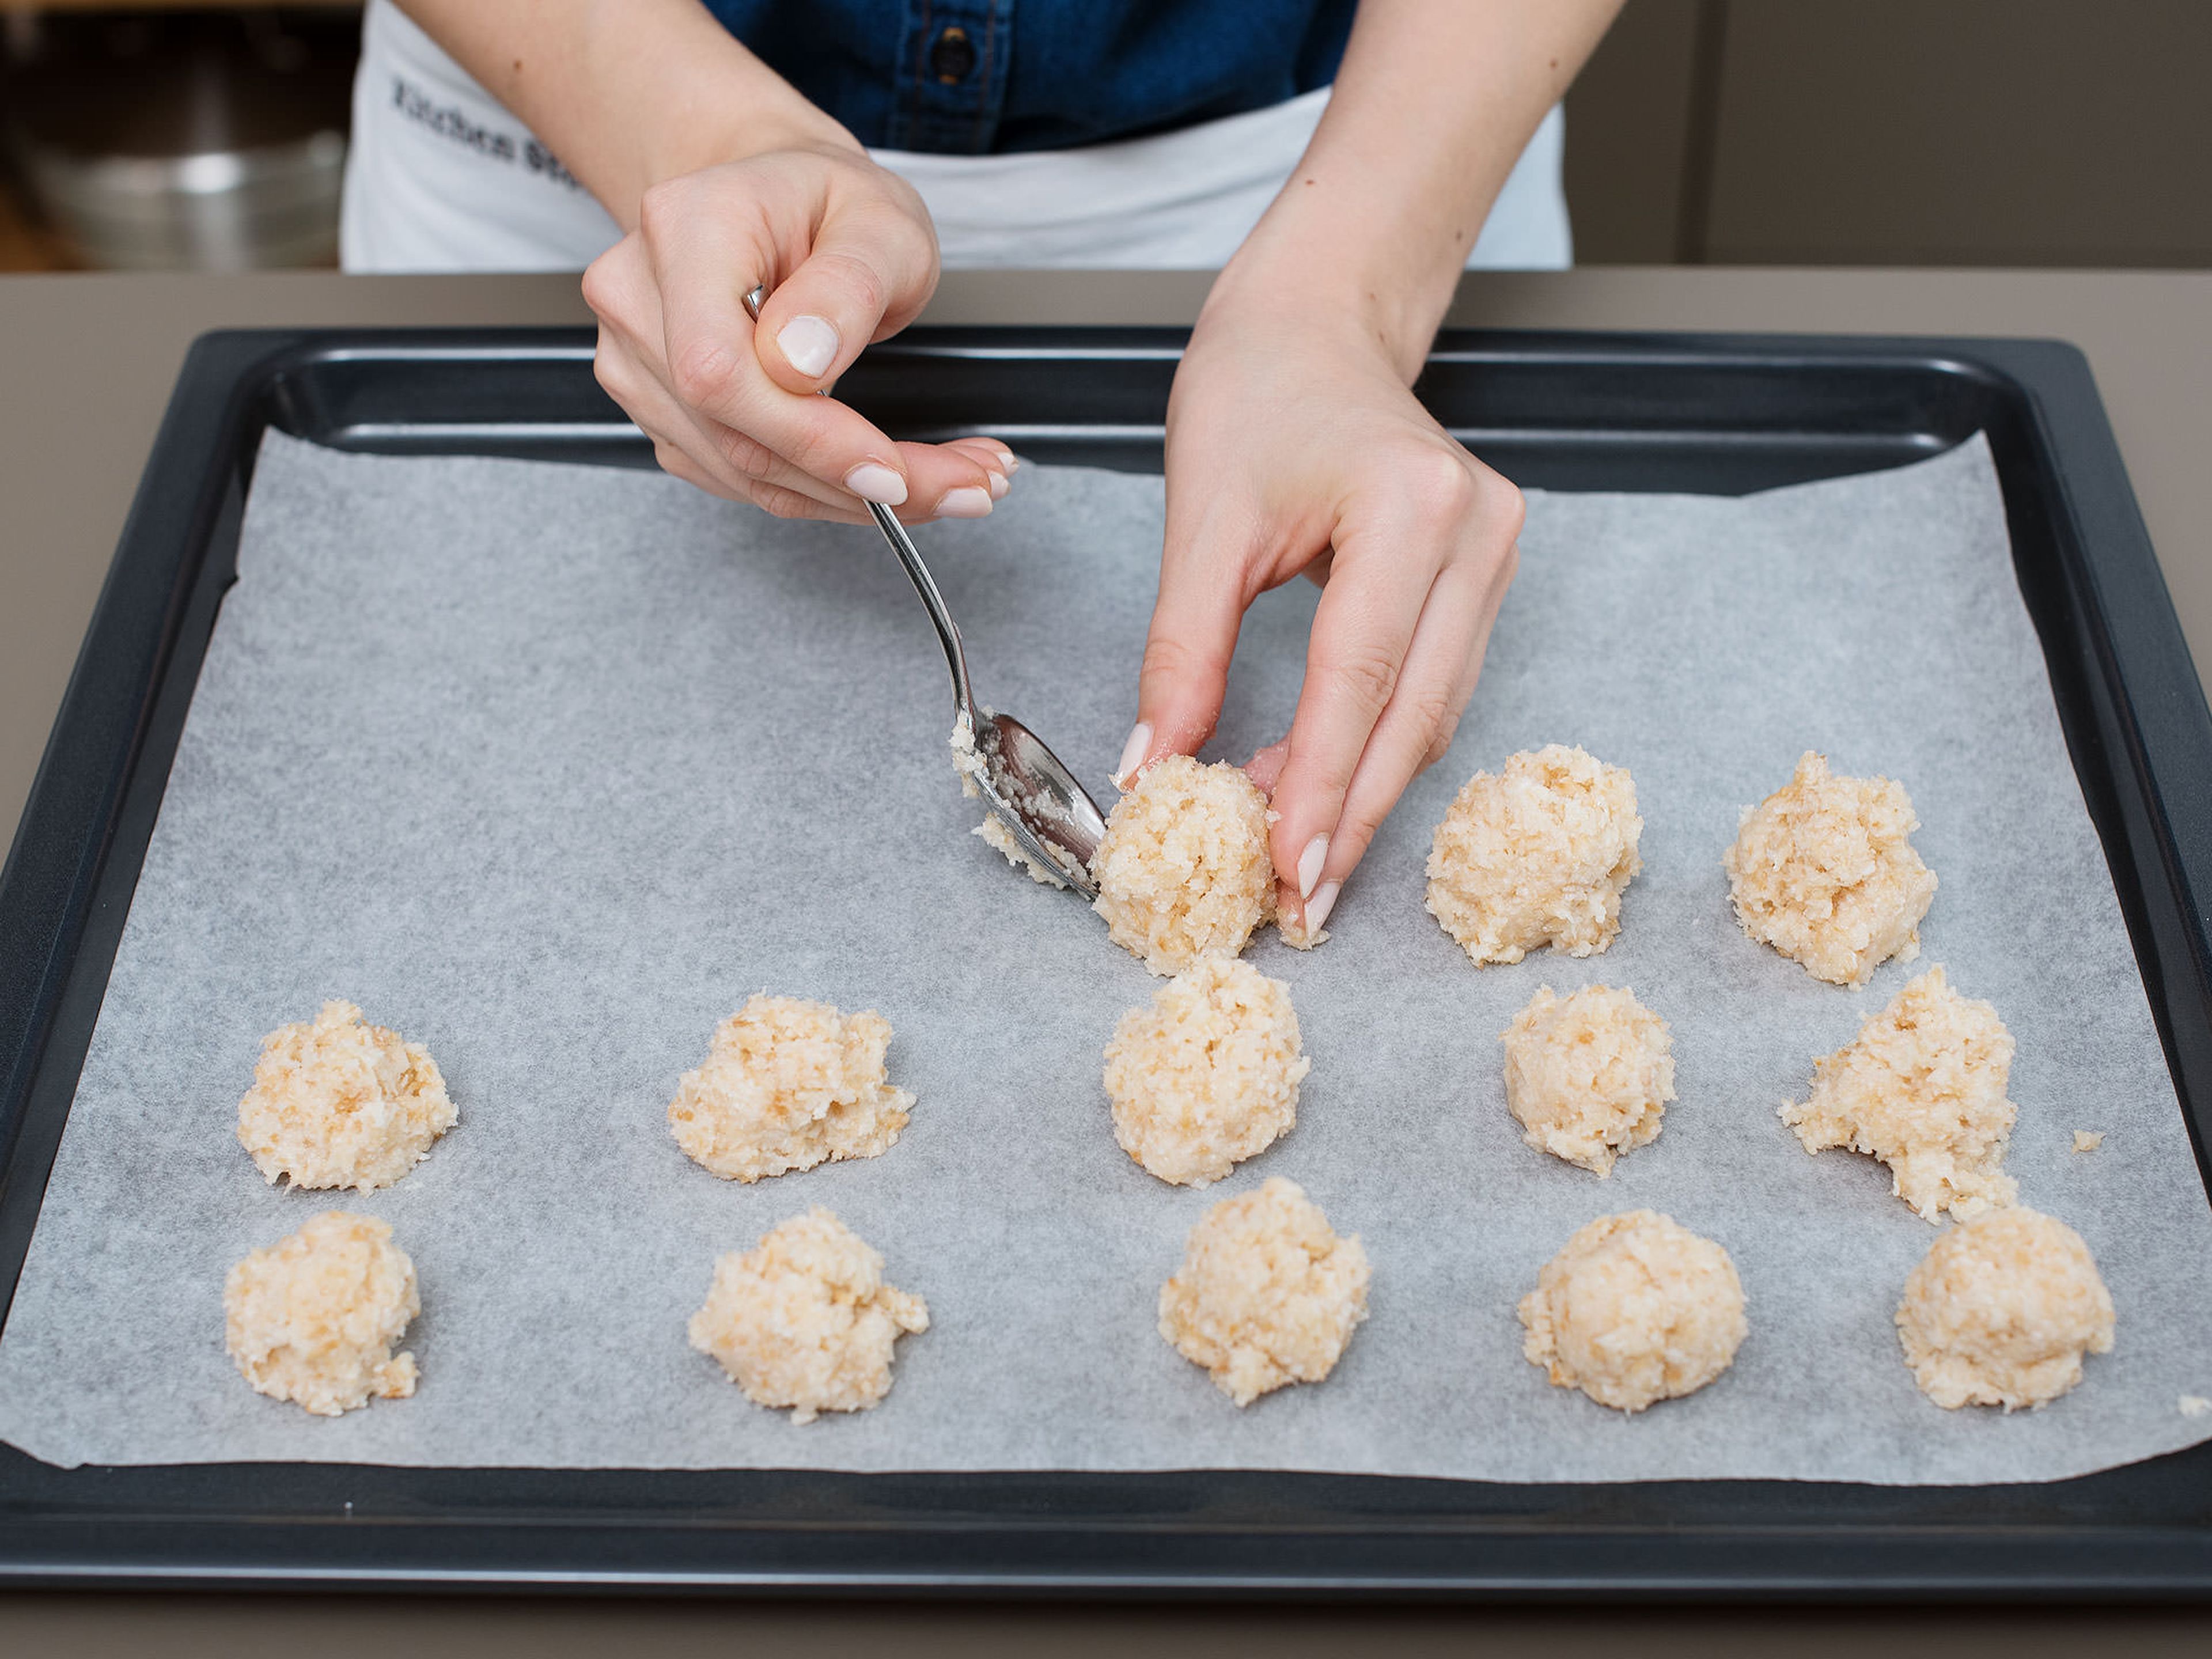 Form coconut mix into 20 small balls and distribute over a parchment-lined baking sheet. Transfer to oven at 170°C/350°F for approx. 15 min. The macaroons should be lightly browned and still a bit soft. Take out of oven and set aside to cool.